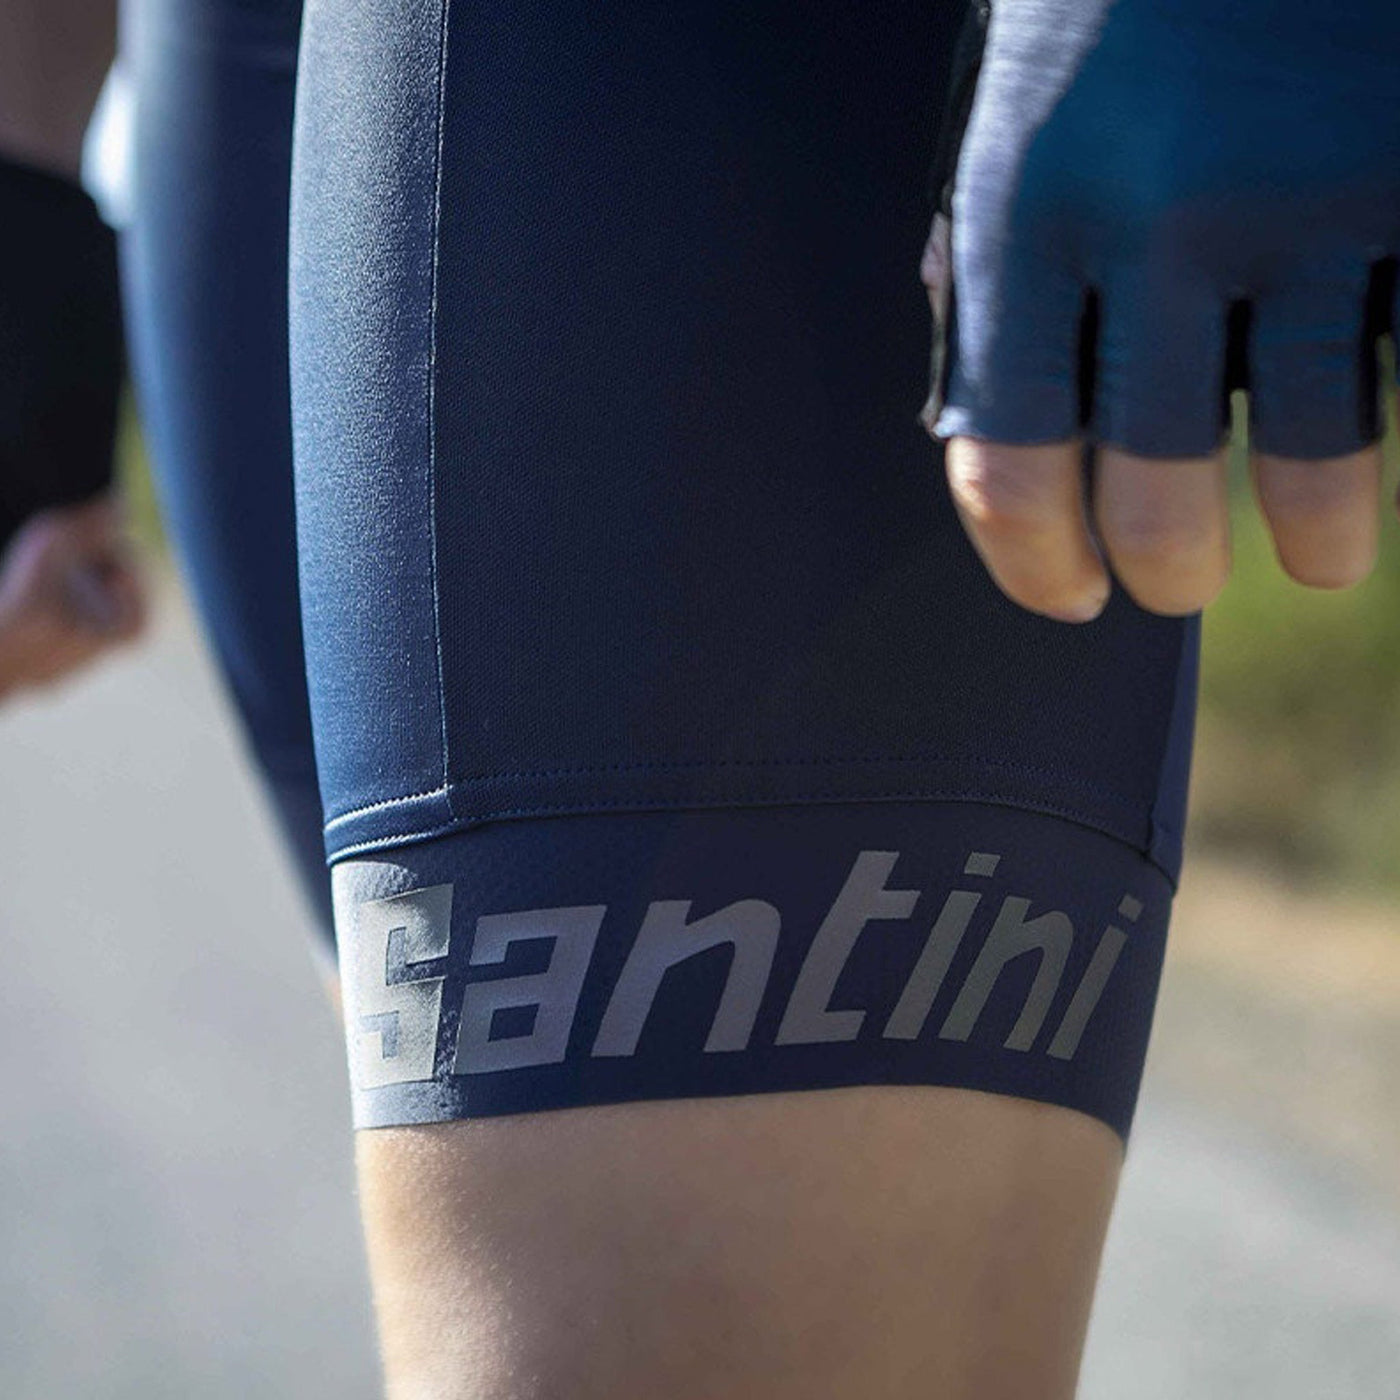 Comfortable cycling shorts and bib knicks with comfortable chamois for race and endurance long distance riding